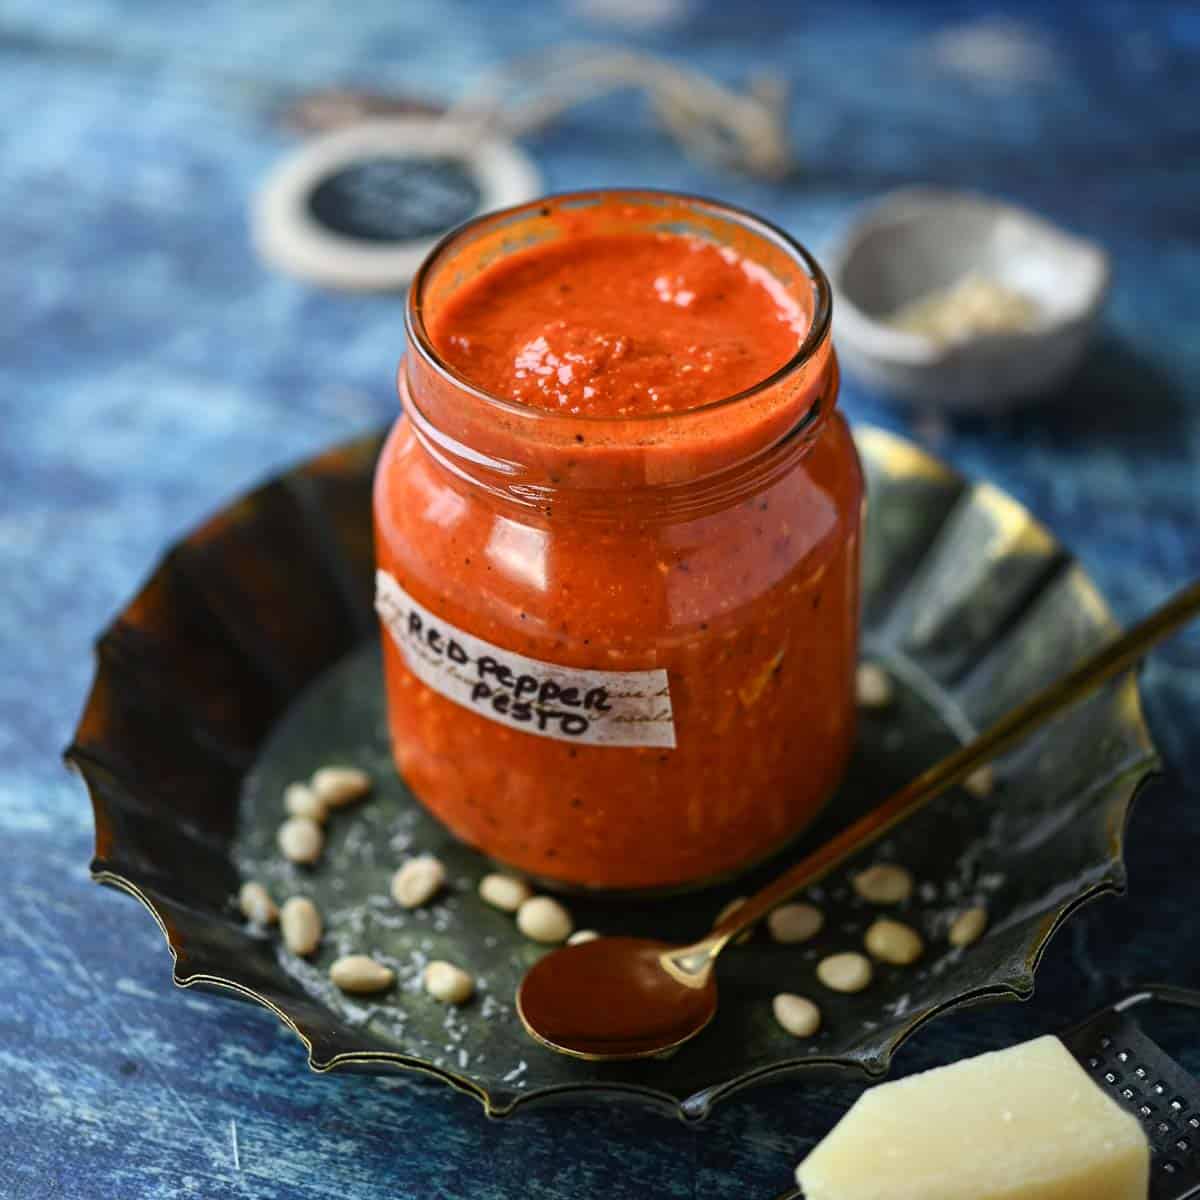 Clear jar of roasted red pepper pesto with a spoon on a blue surface.